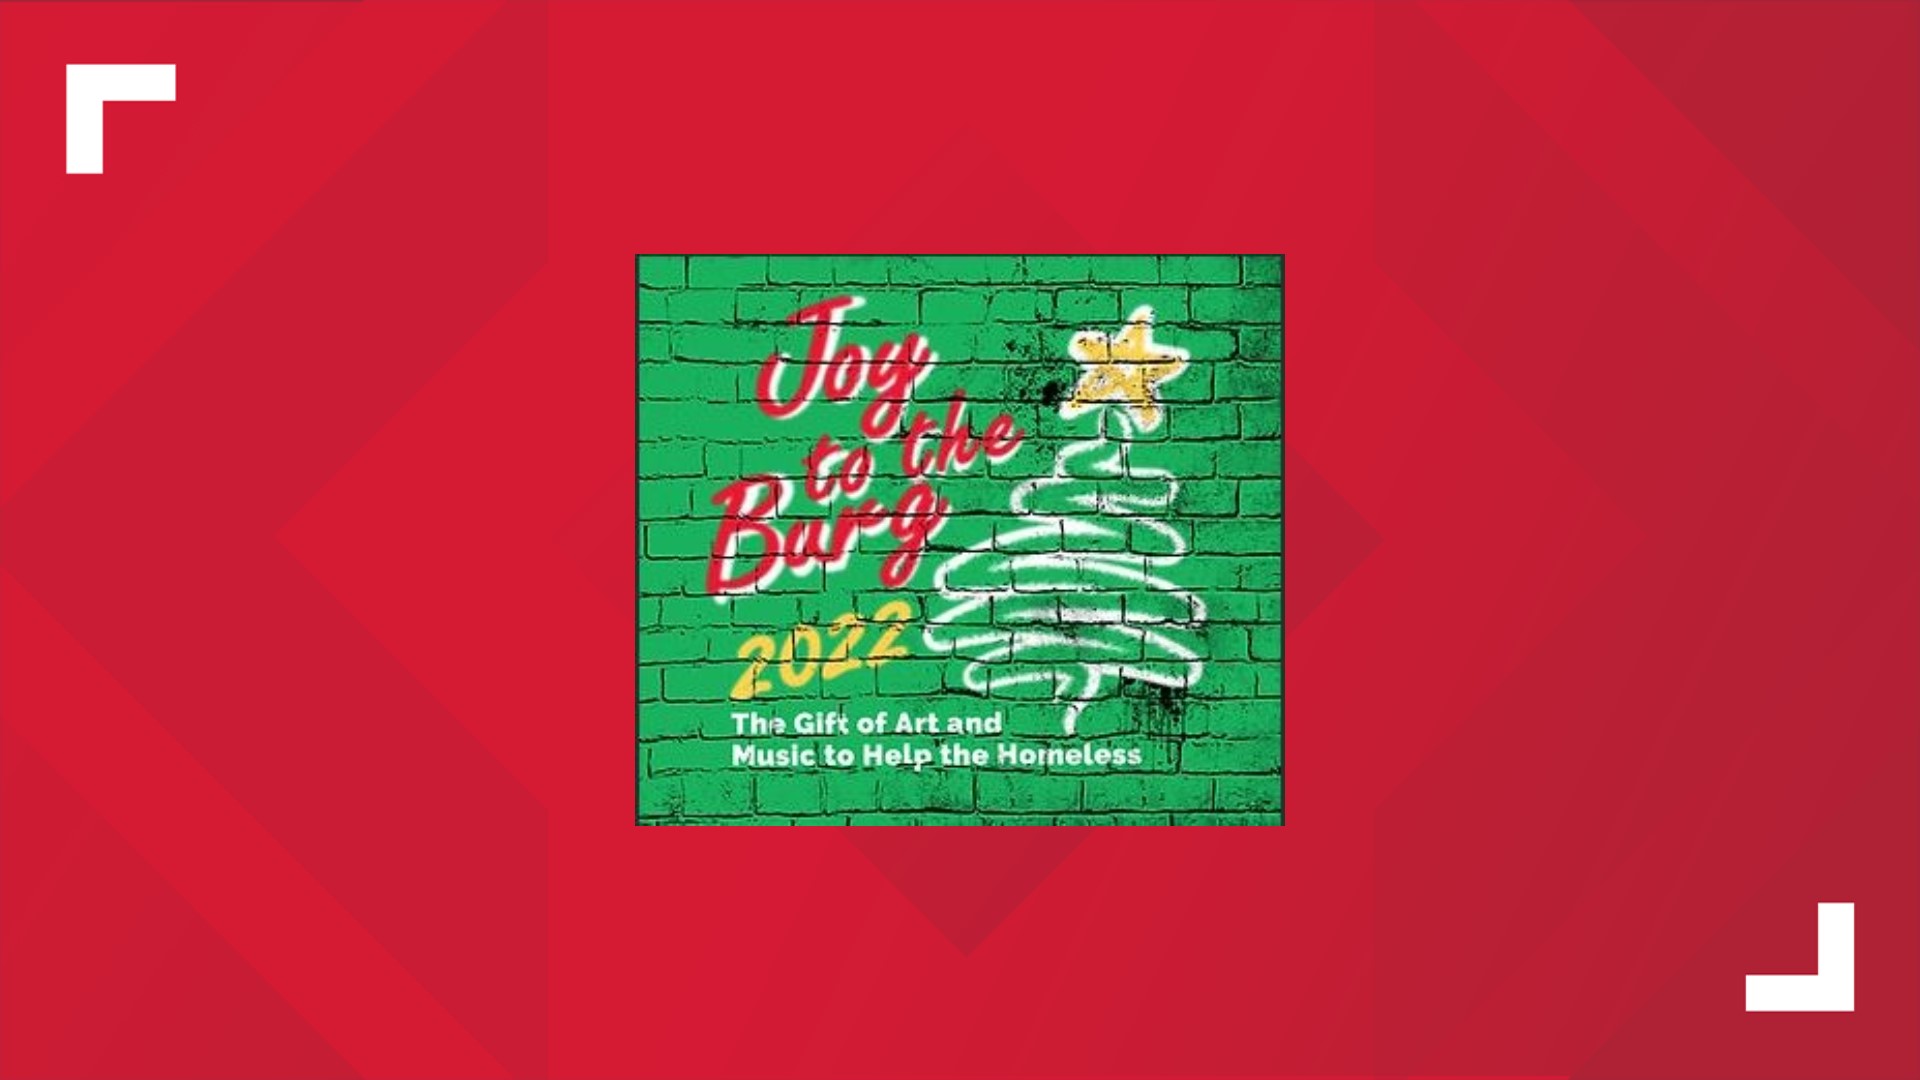 'Joy to the Burg 2022' holiday album will help raise funds for homeless